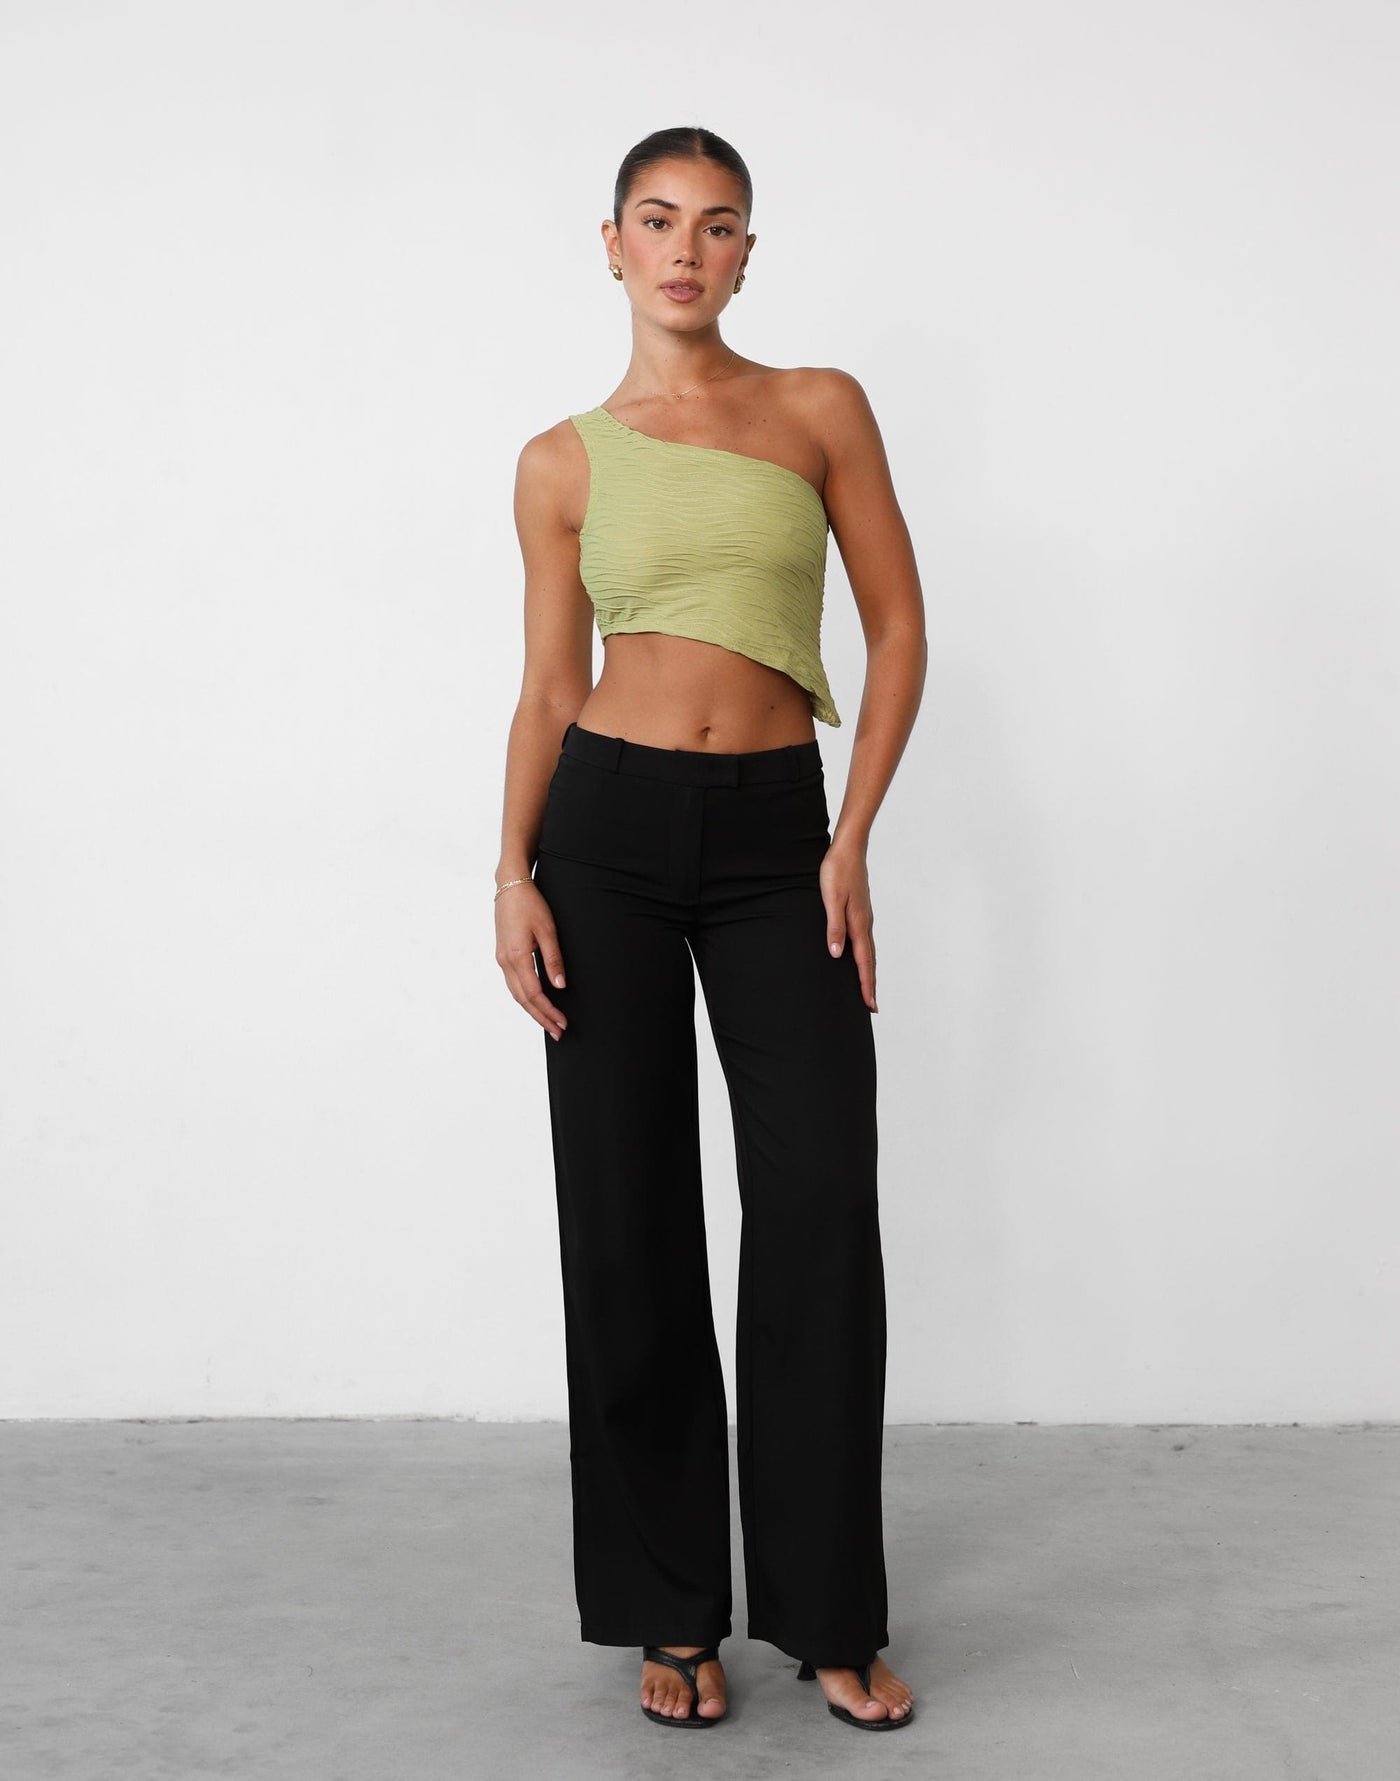 Yianna One Shoulder Top (Olive) - Textured One Shoulder Top - Women's Top - Charcoal Clothing